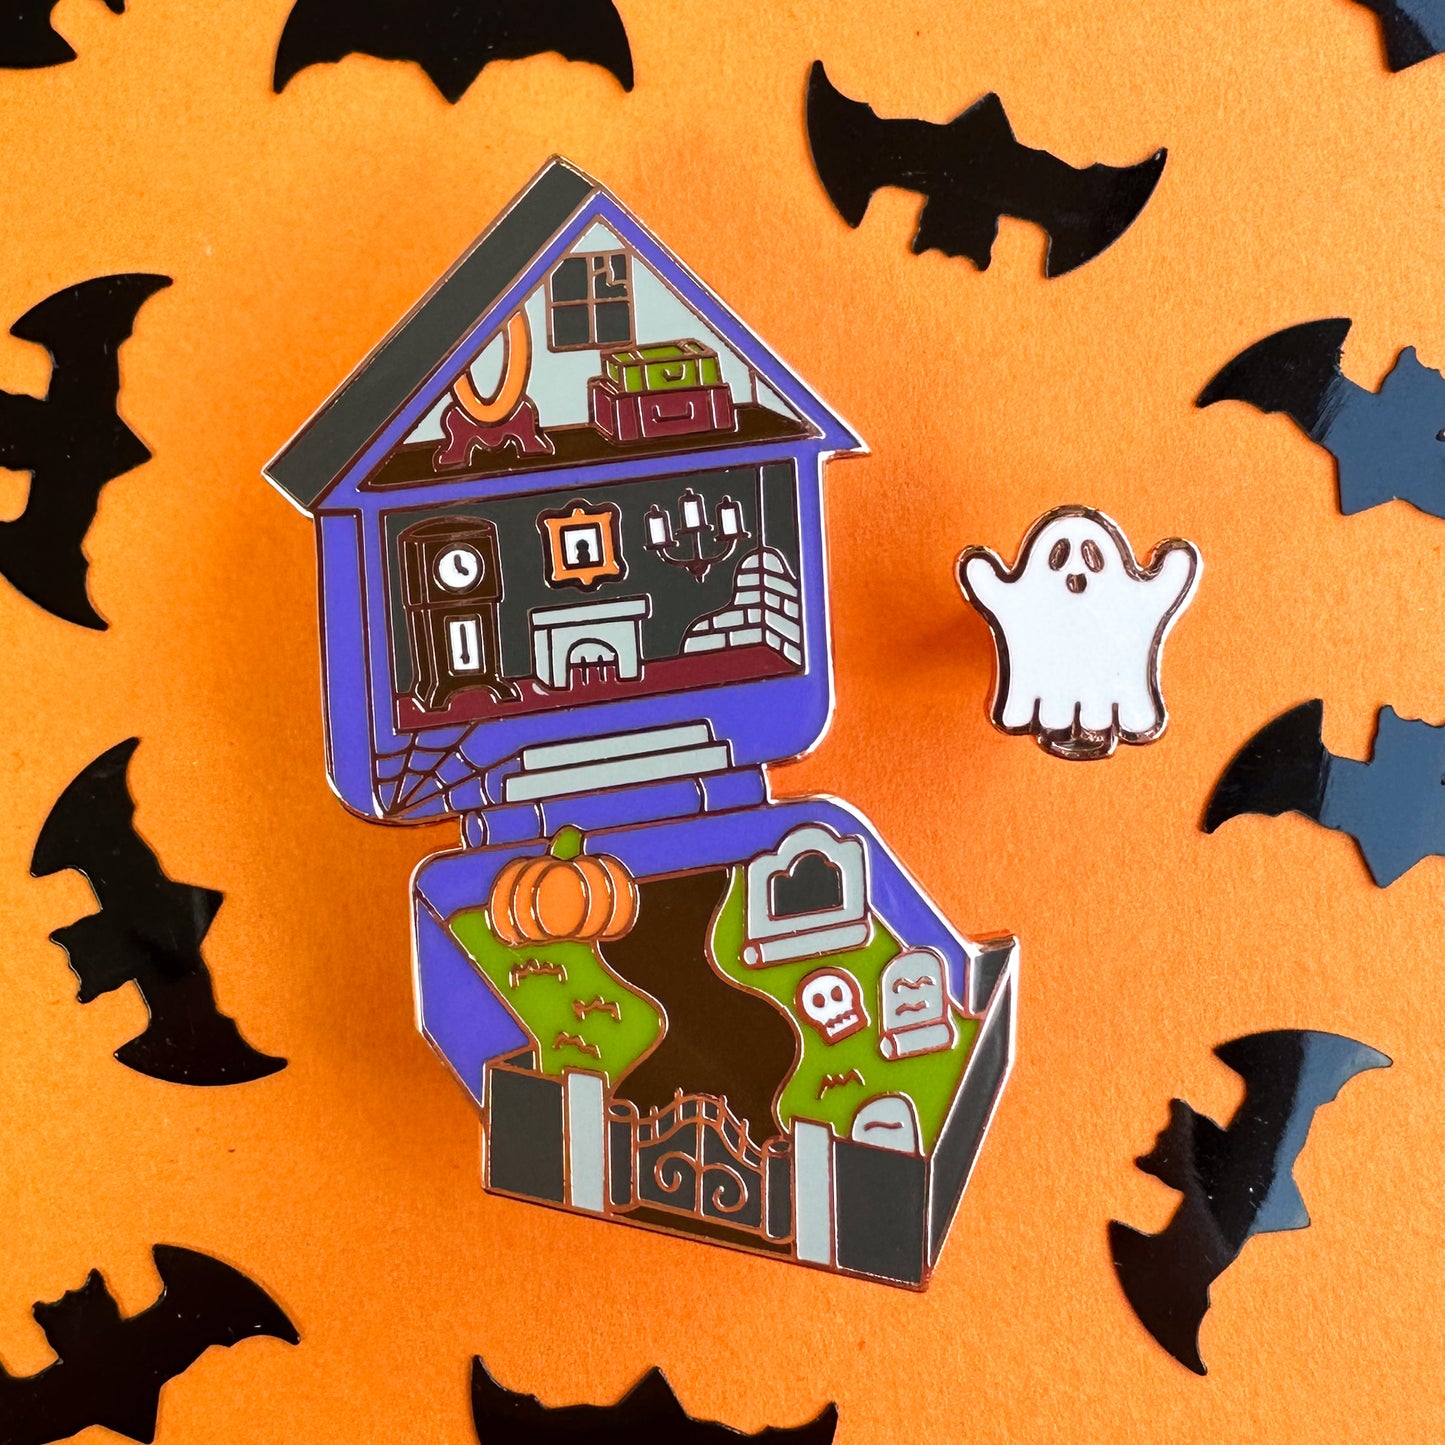 A haunted house and ghost pin set in the style of Polly Pocket toys. The house has a spooky attic with a broken window, a fireplace and a yard featuring a pumpkin and gravestones. The house is purple with a black roof.